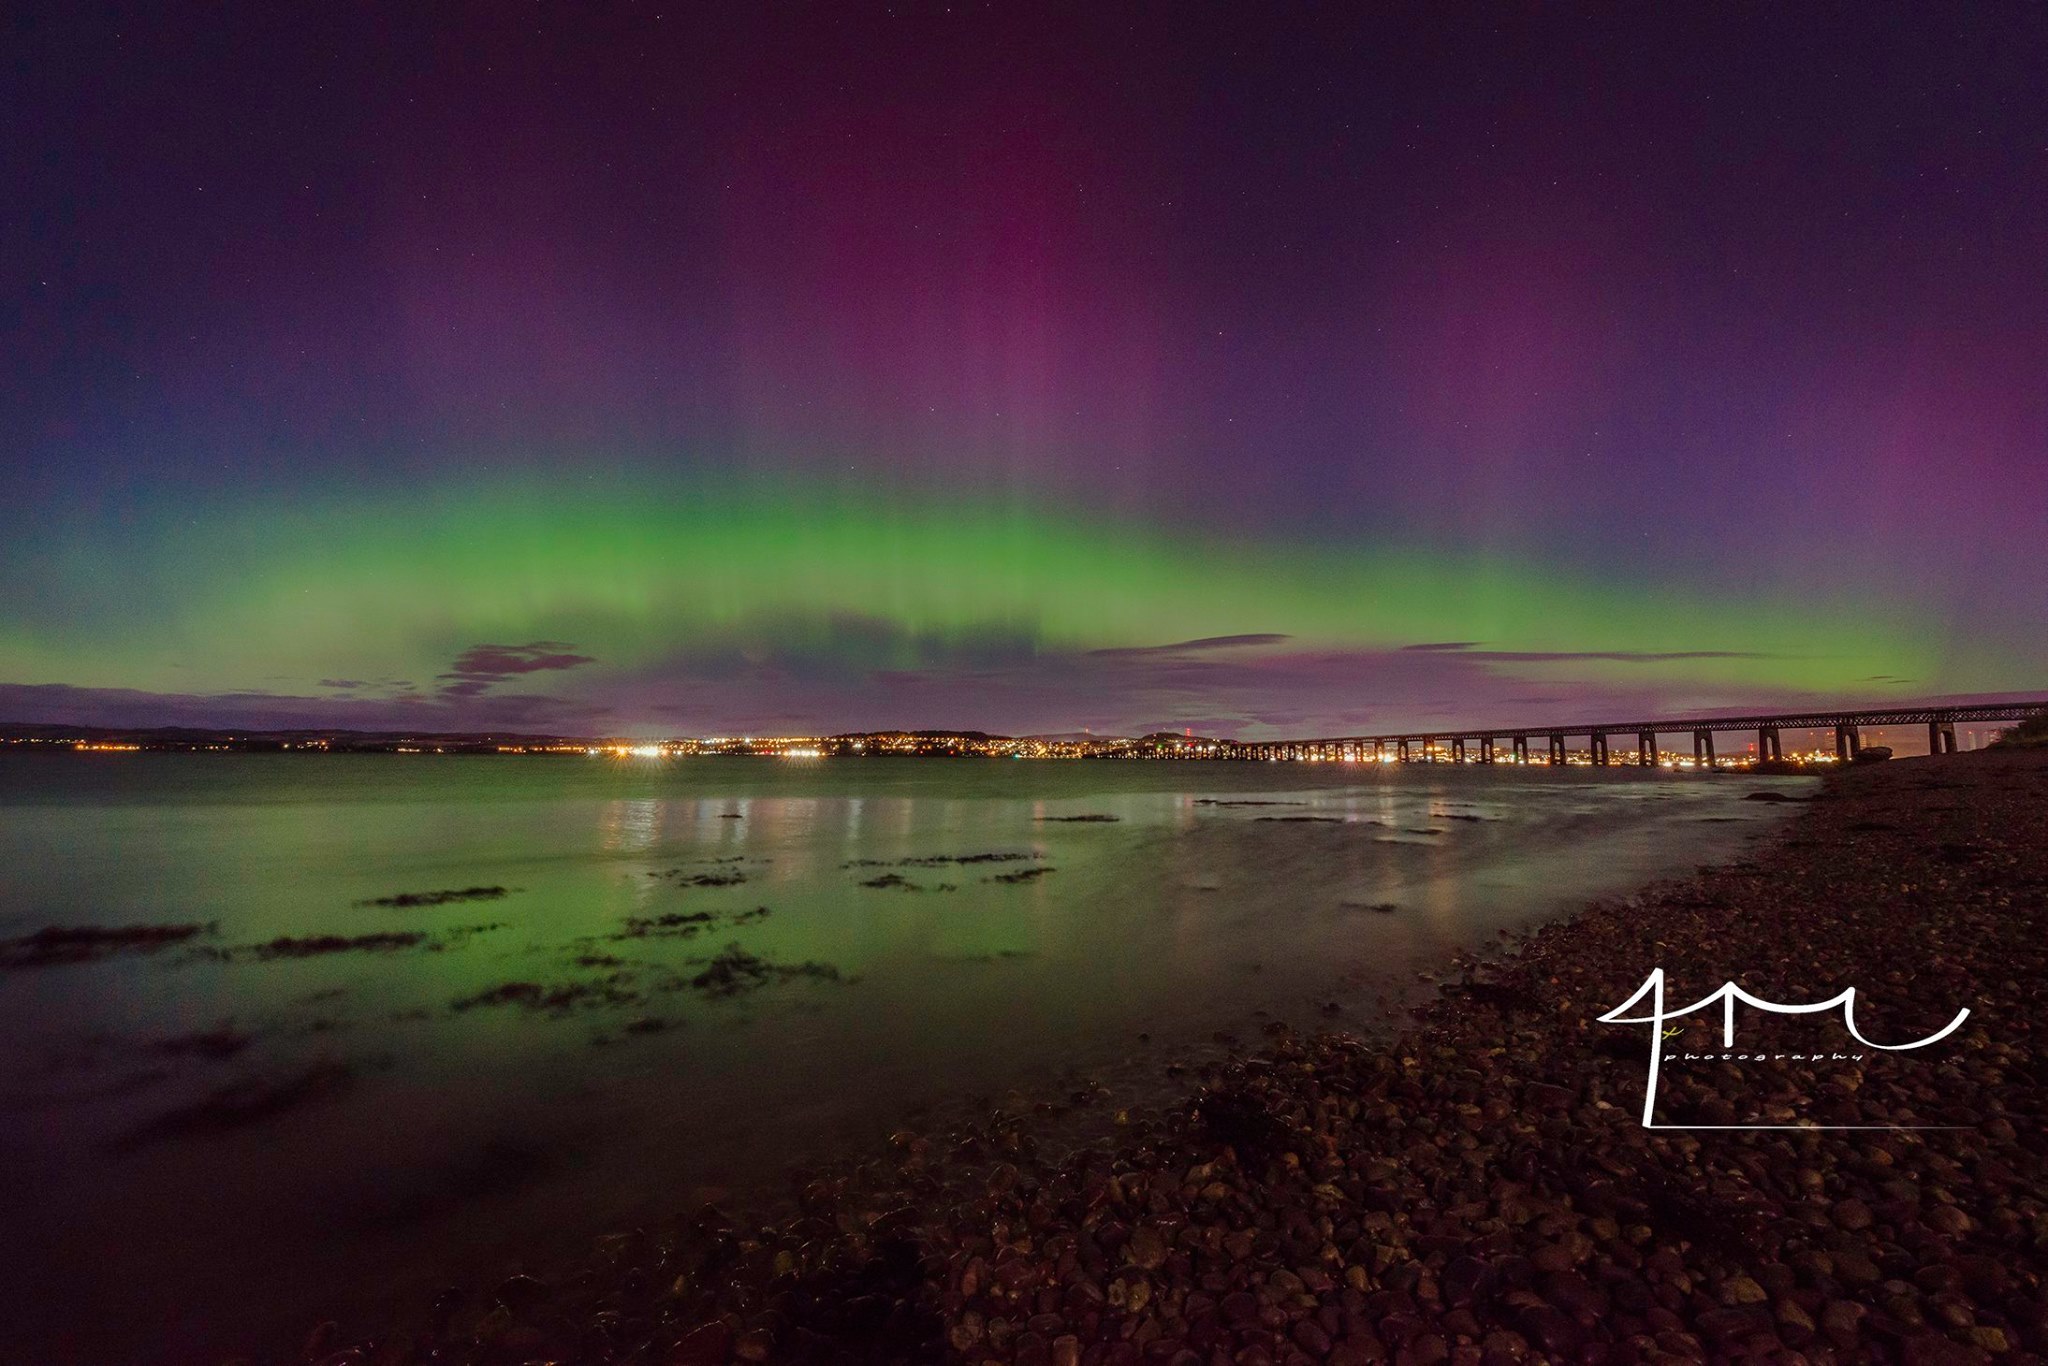 Marta Krakowiecka's photo of the aurora above Dundee in the early hours of Friday morning.